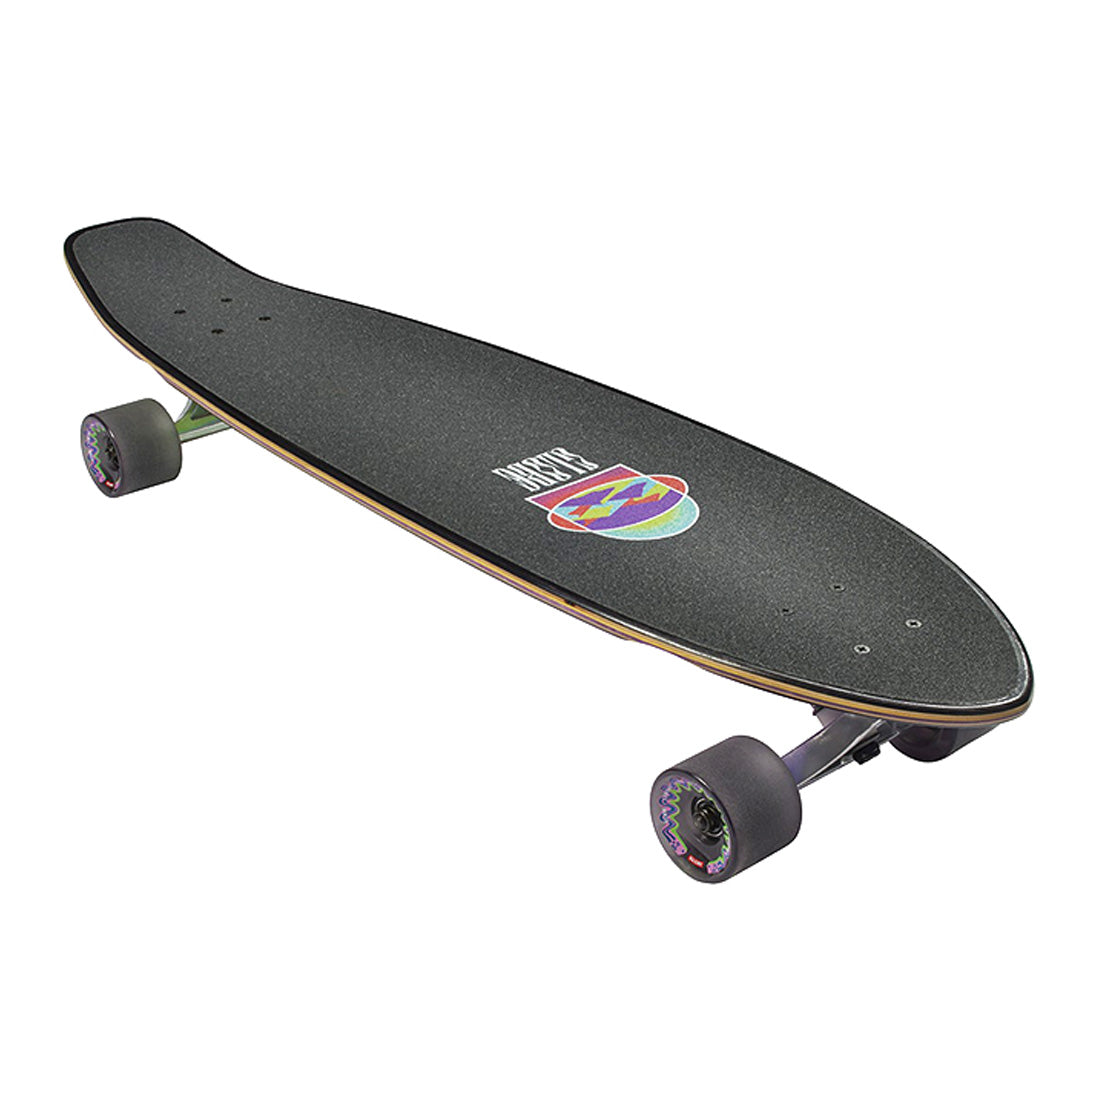 Globe The All-Time 35 Complete - Sharps On The Brain Skateboard Completes Longboards